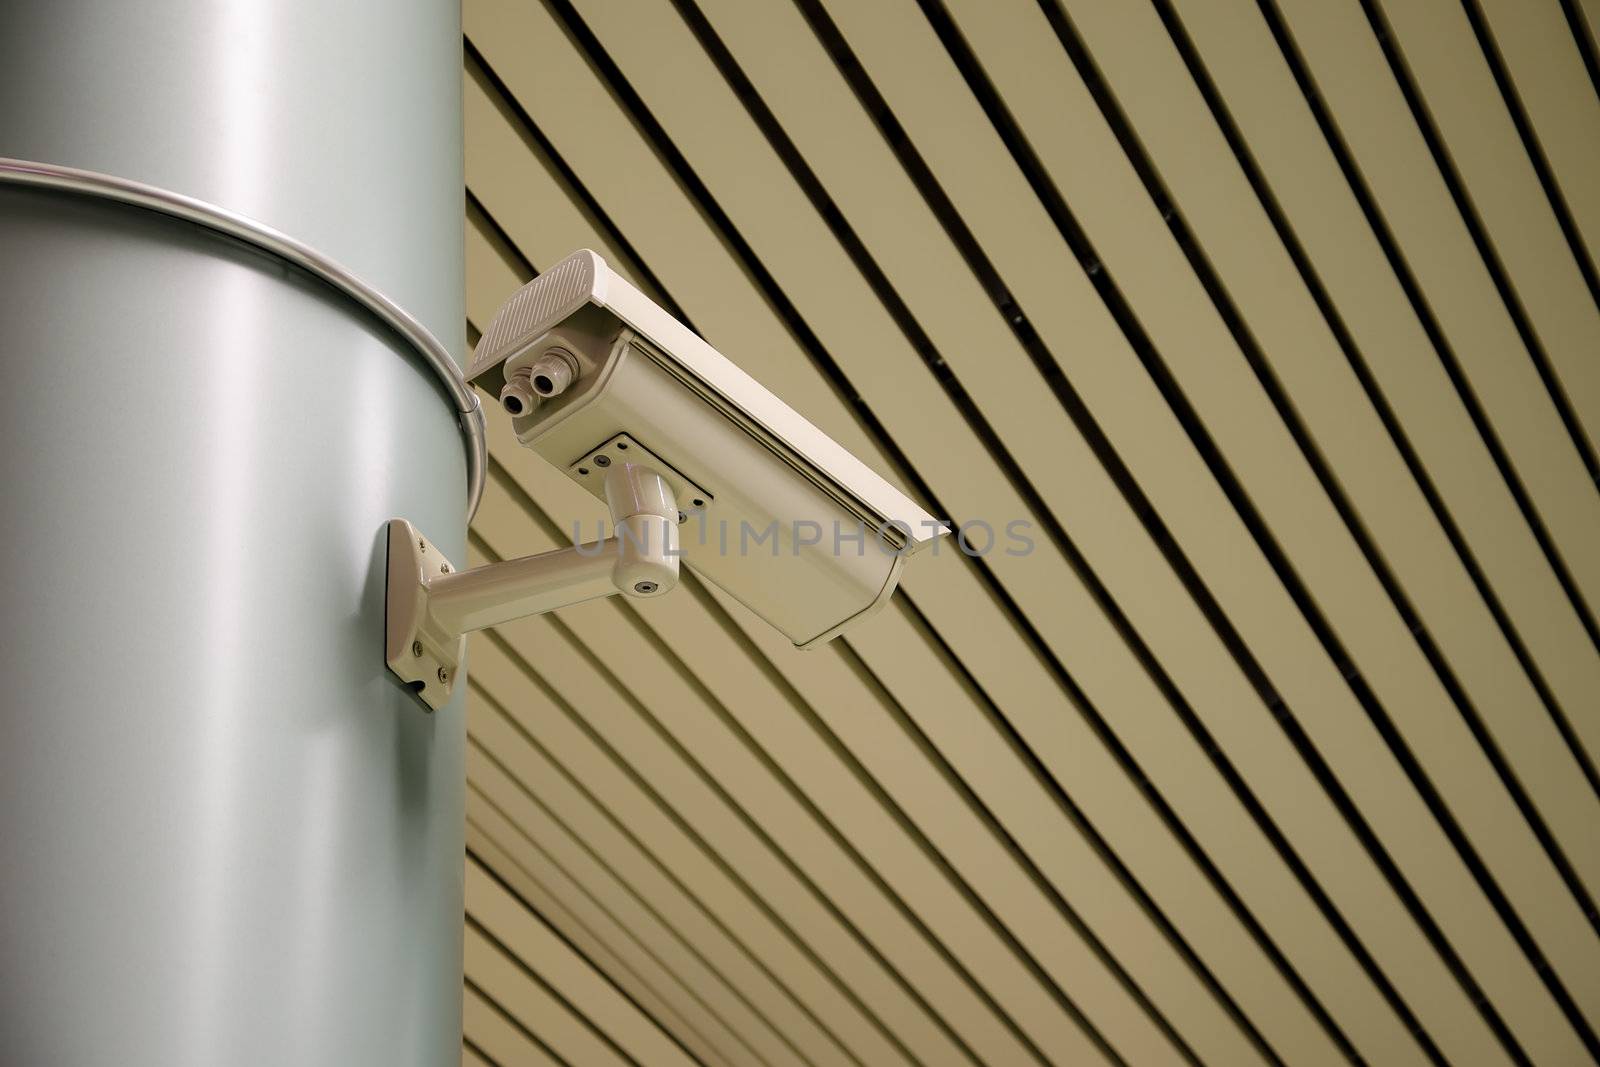 Video camera security system on a metal column